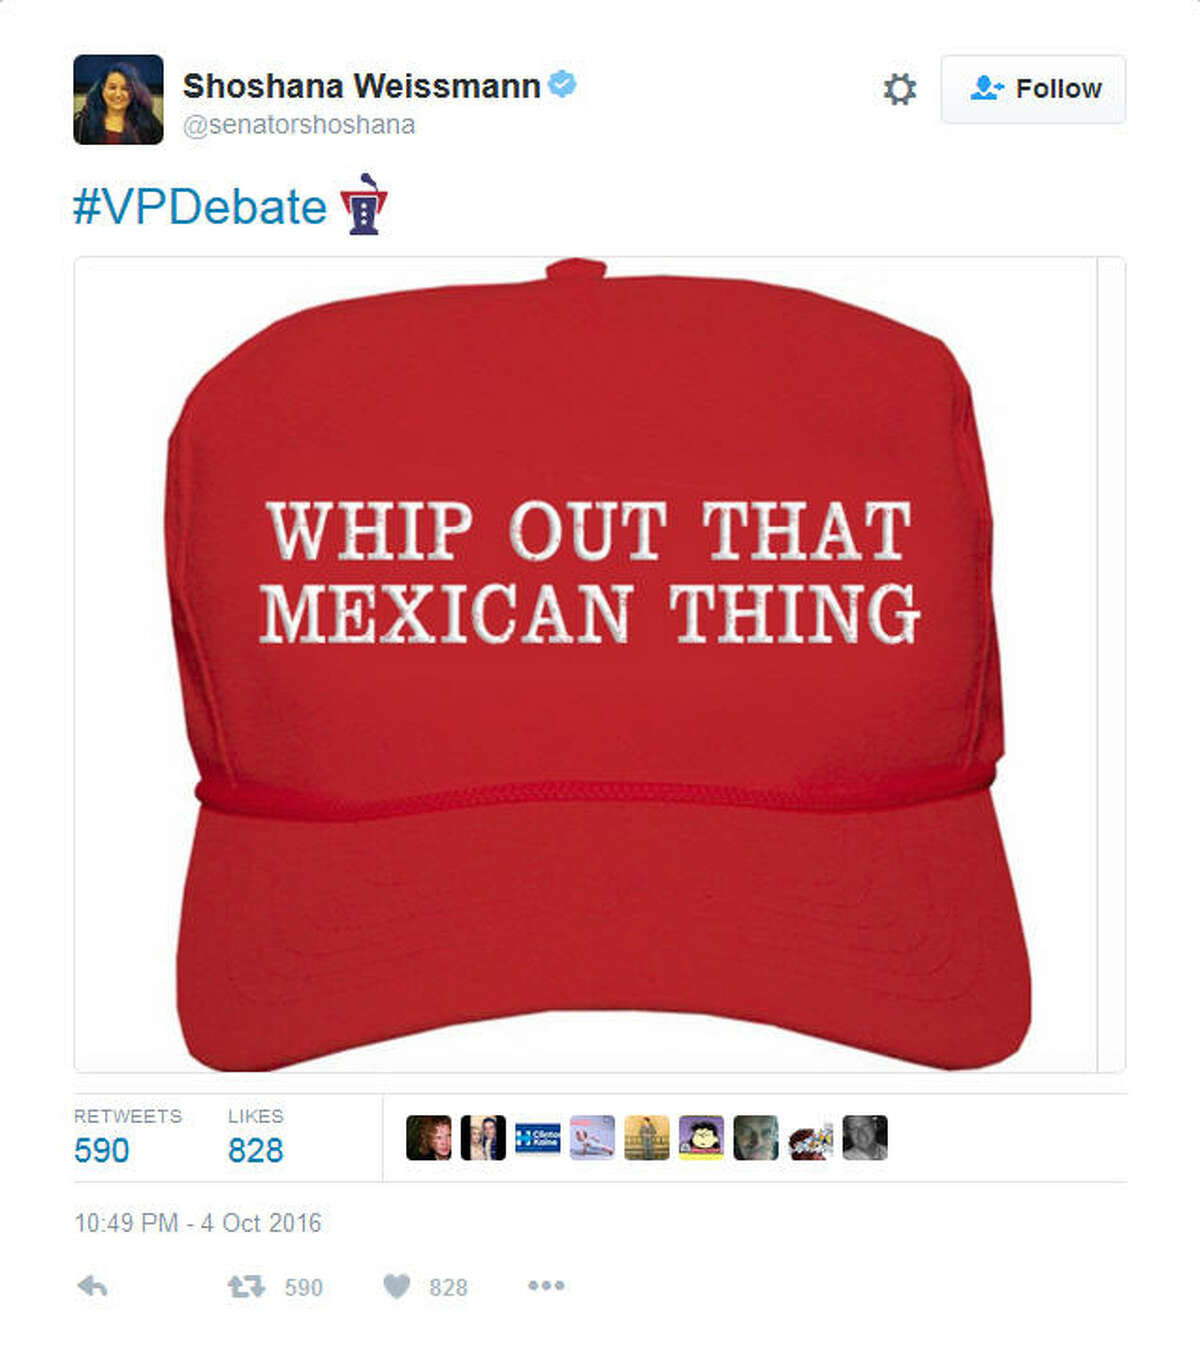 A screenshot of a Twitter post following the vice-presidential debate between Sen. Tim Kaine, D-Va. and Gov. Mike Pence, R-Ind. on Oct. 4, 2016. During the debate, Pence brushed off Kaine's statements regarding GOP presidential nominee Donald Trump's thoughts on Mexican immigrants, saying, "Senator, you whipped out that Mexican thing again." Some social media users vented their frustration at Pence's comments by turning it, in part, into a hashtag.